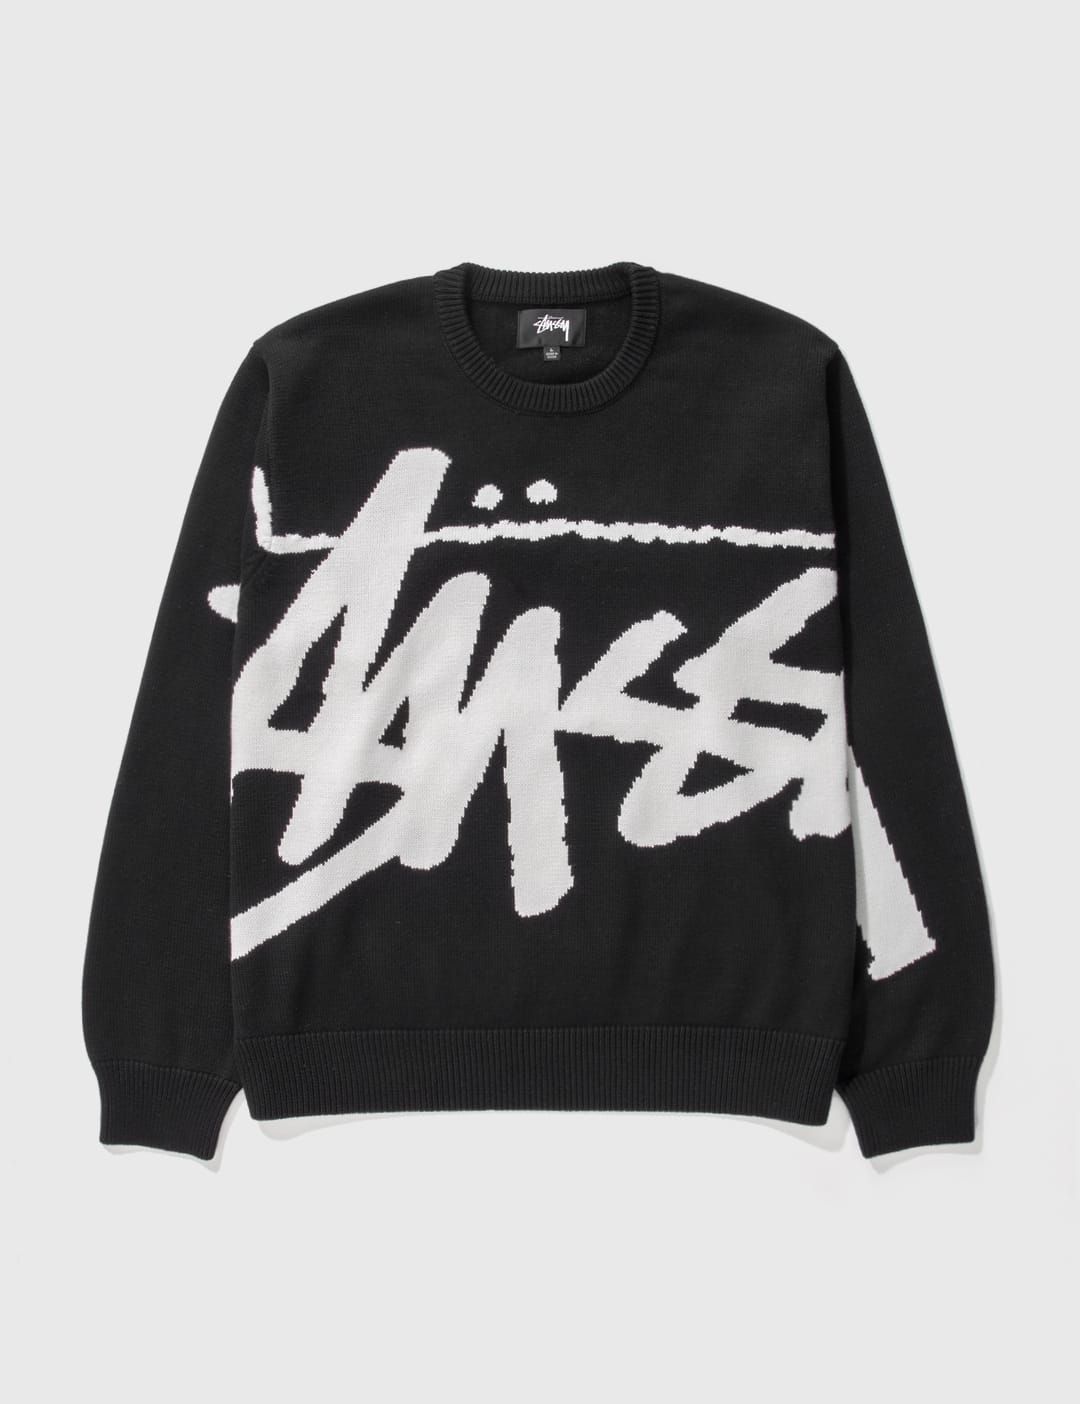 Stüssy - Stock Sweater | HBX - Globally Curated Fashion and 